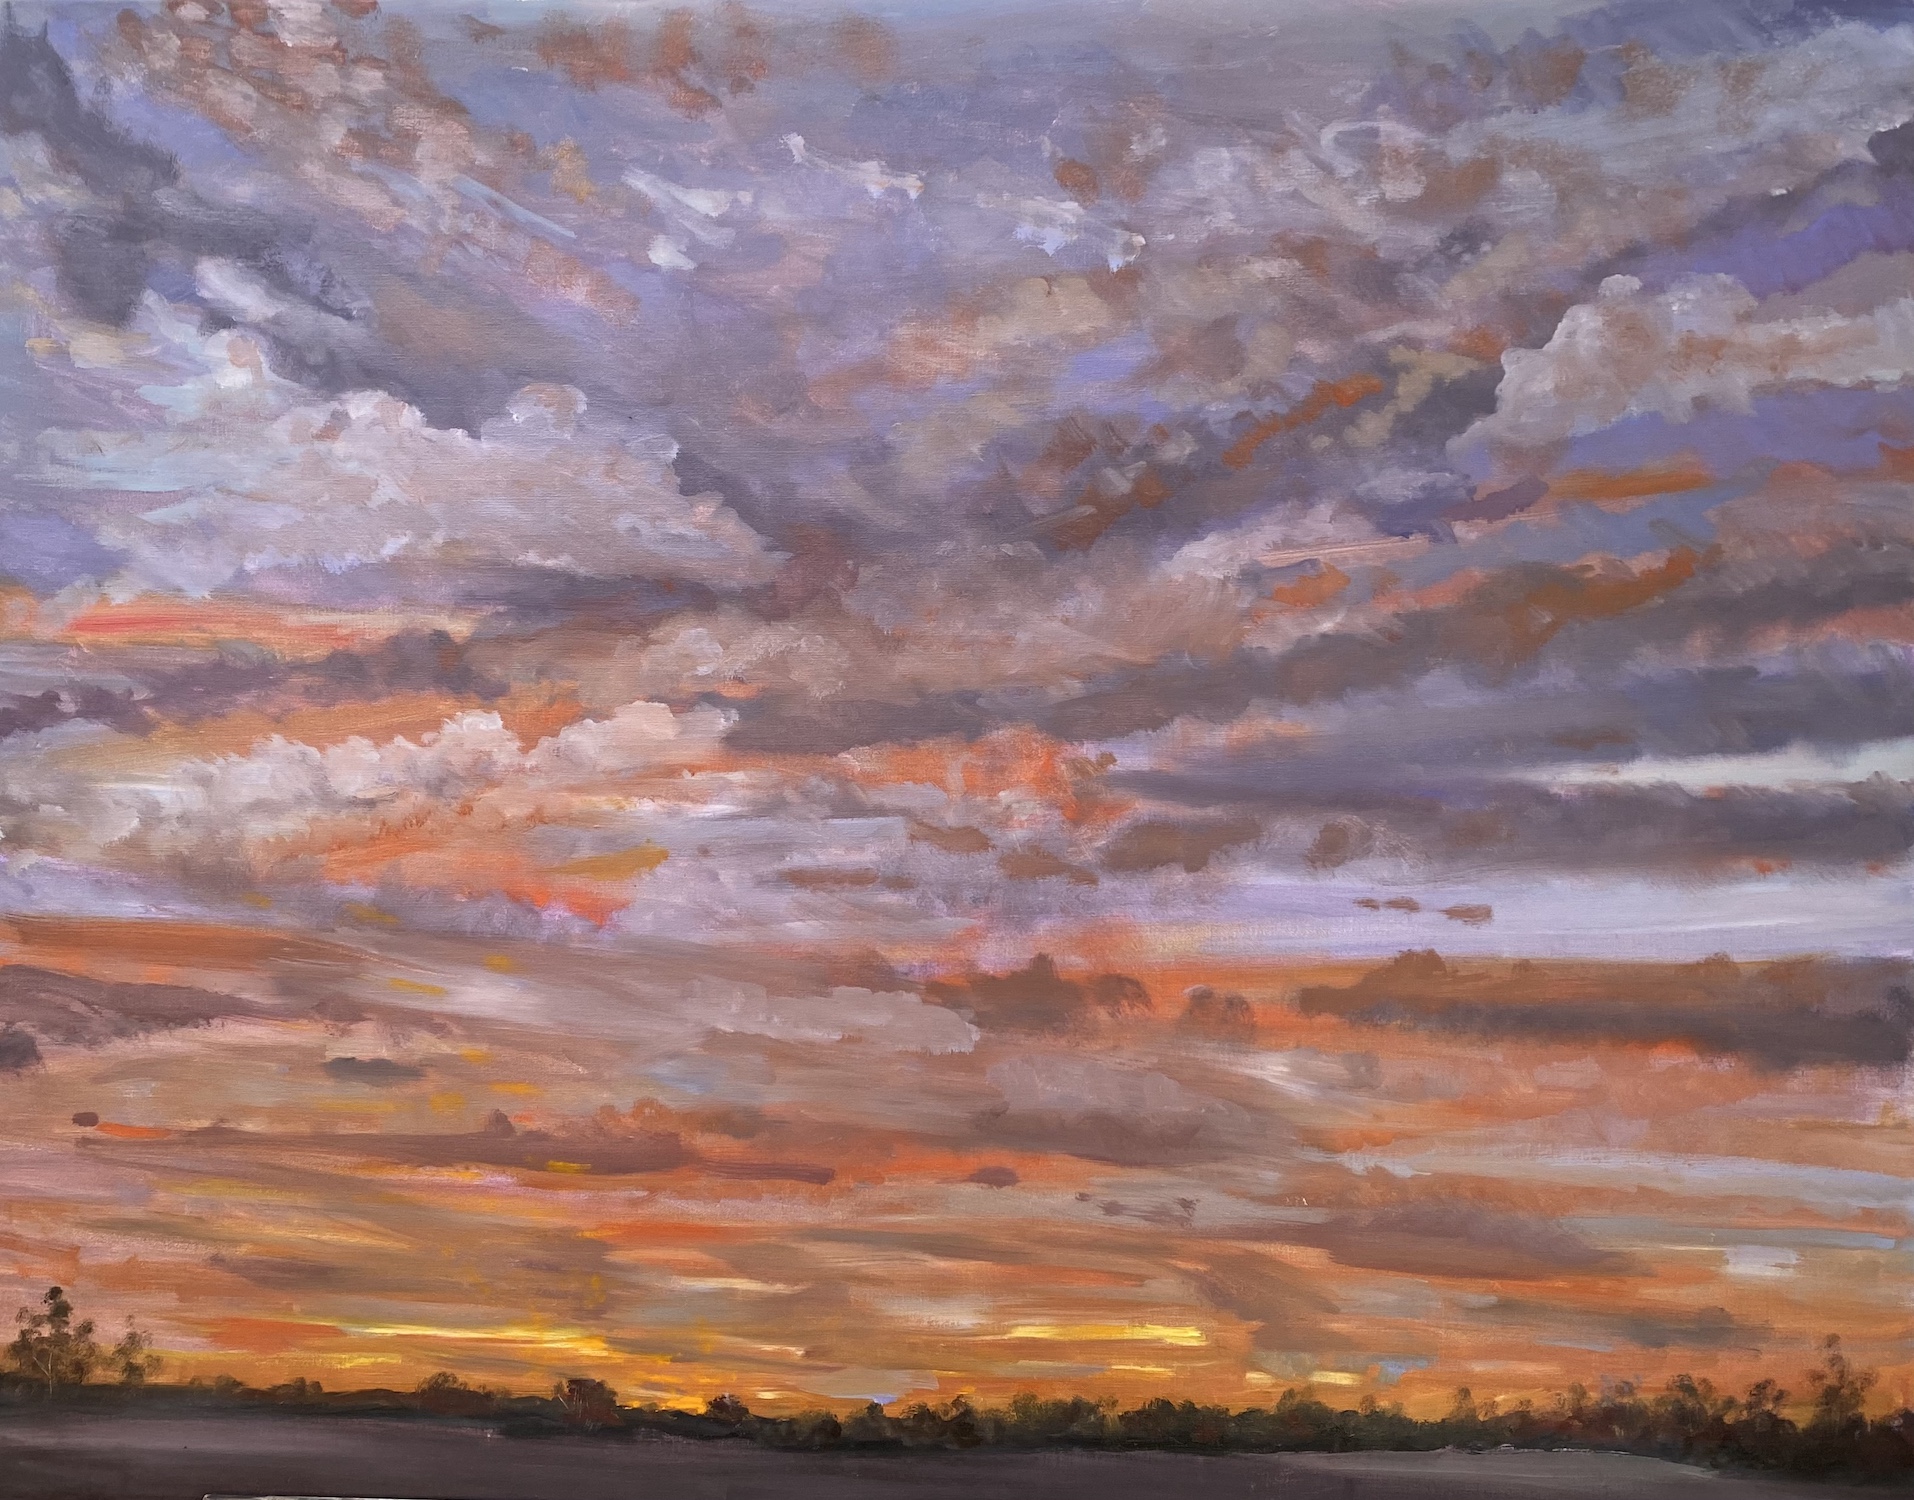 'Sunset Over Shelley', Michael Crowe, Oil on linen, 110 x 140 cm